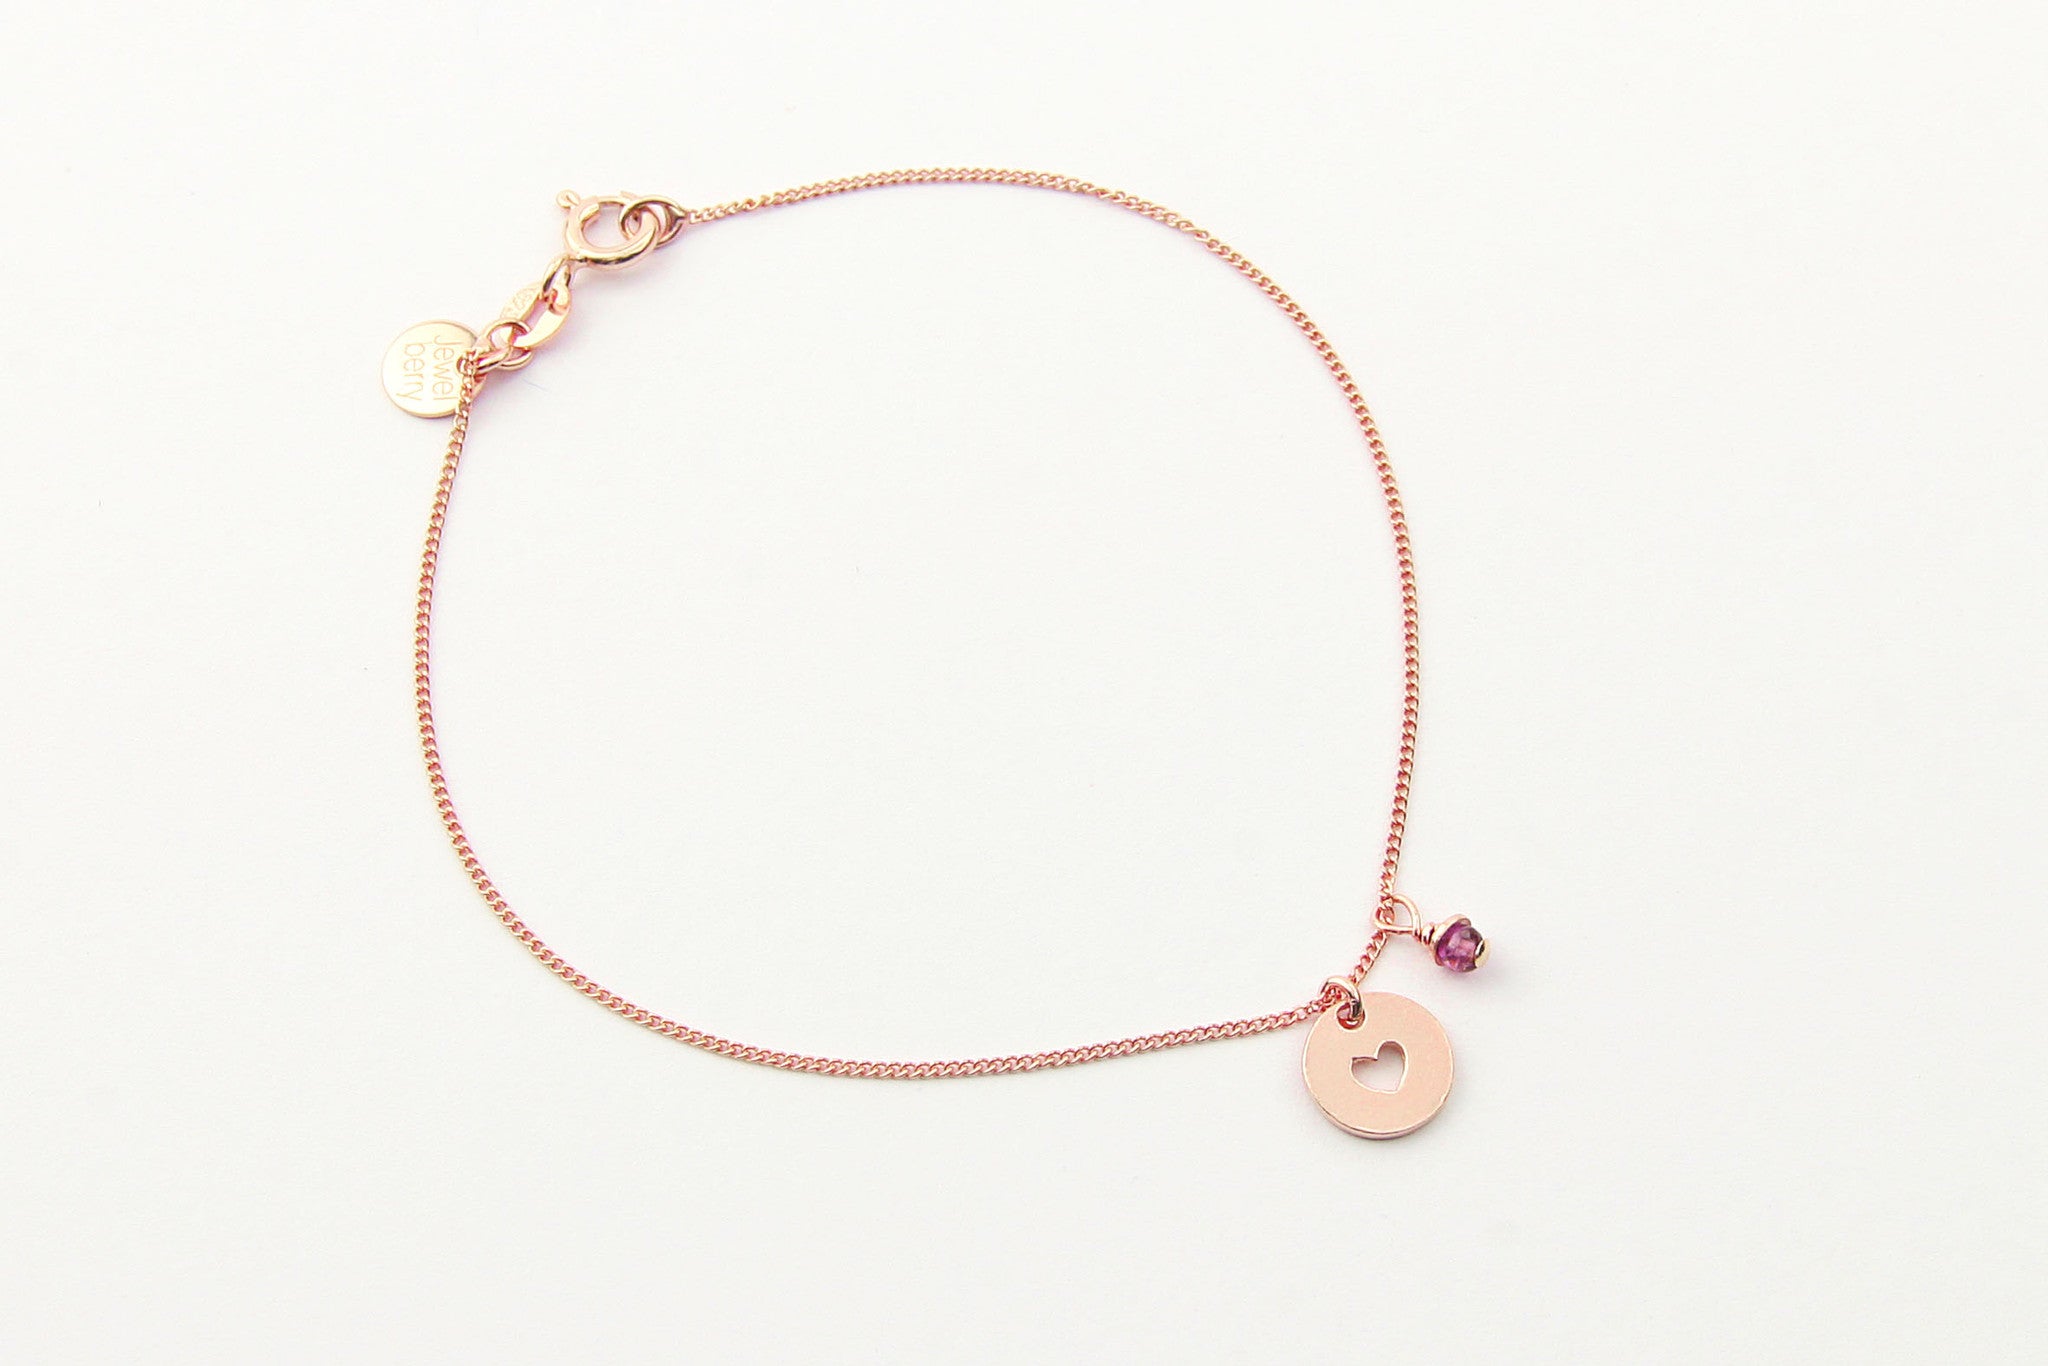 jewelberry armband bracelet love token rose gold plated sterling silver fine jewelry handmade with love fairtrade curb chain